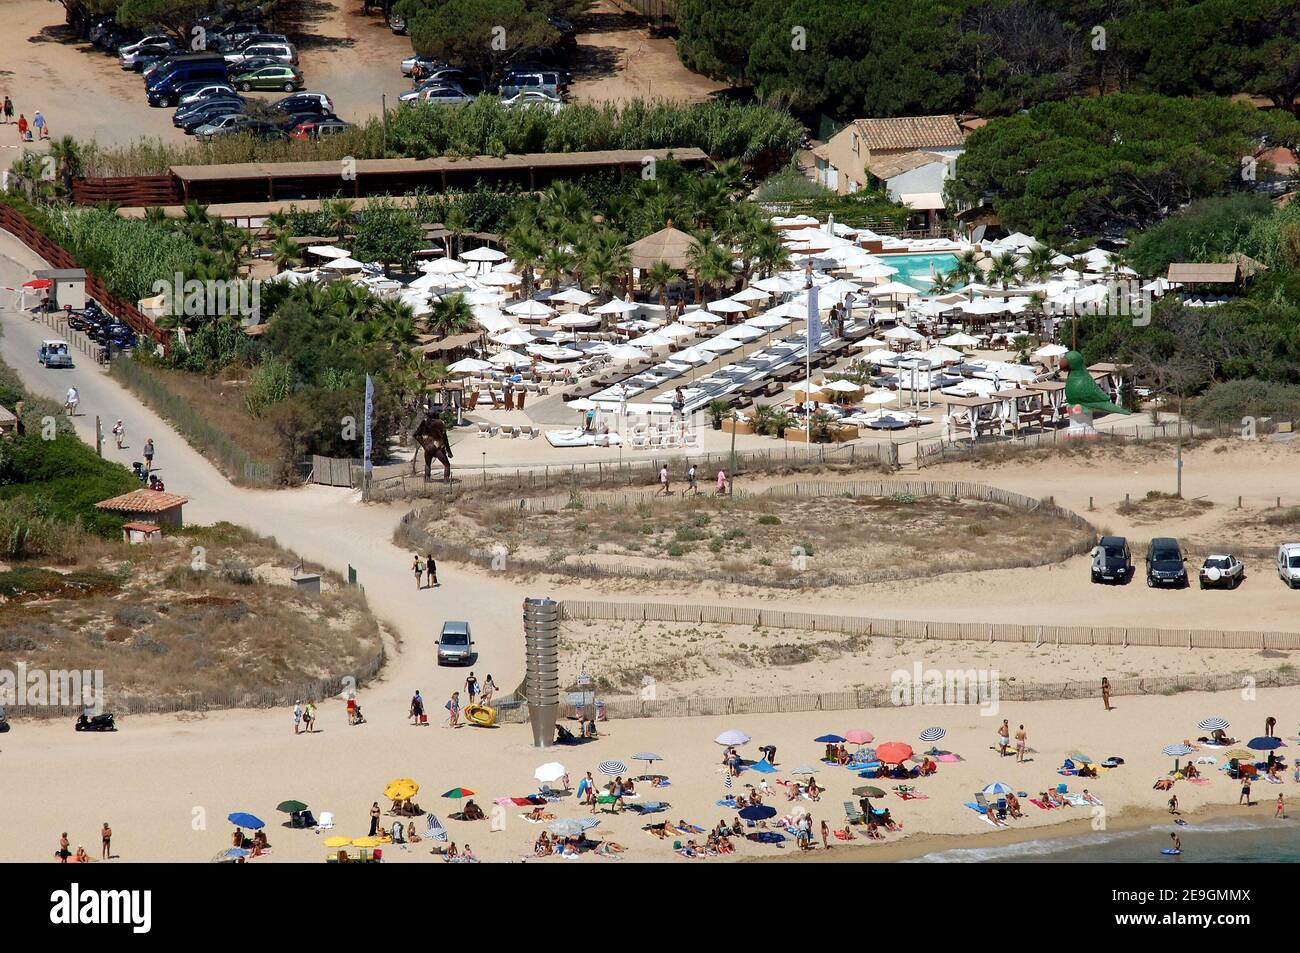 Aerial views of the Nikki Beach in Saint-Tropez, France on July 29, 2006. Pamela Anderson and Kid Rock wedding party will take place here tonight. Photo by ABACAPRESS.COM Stock Photo